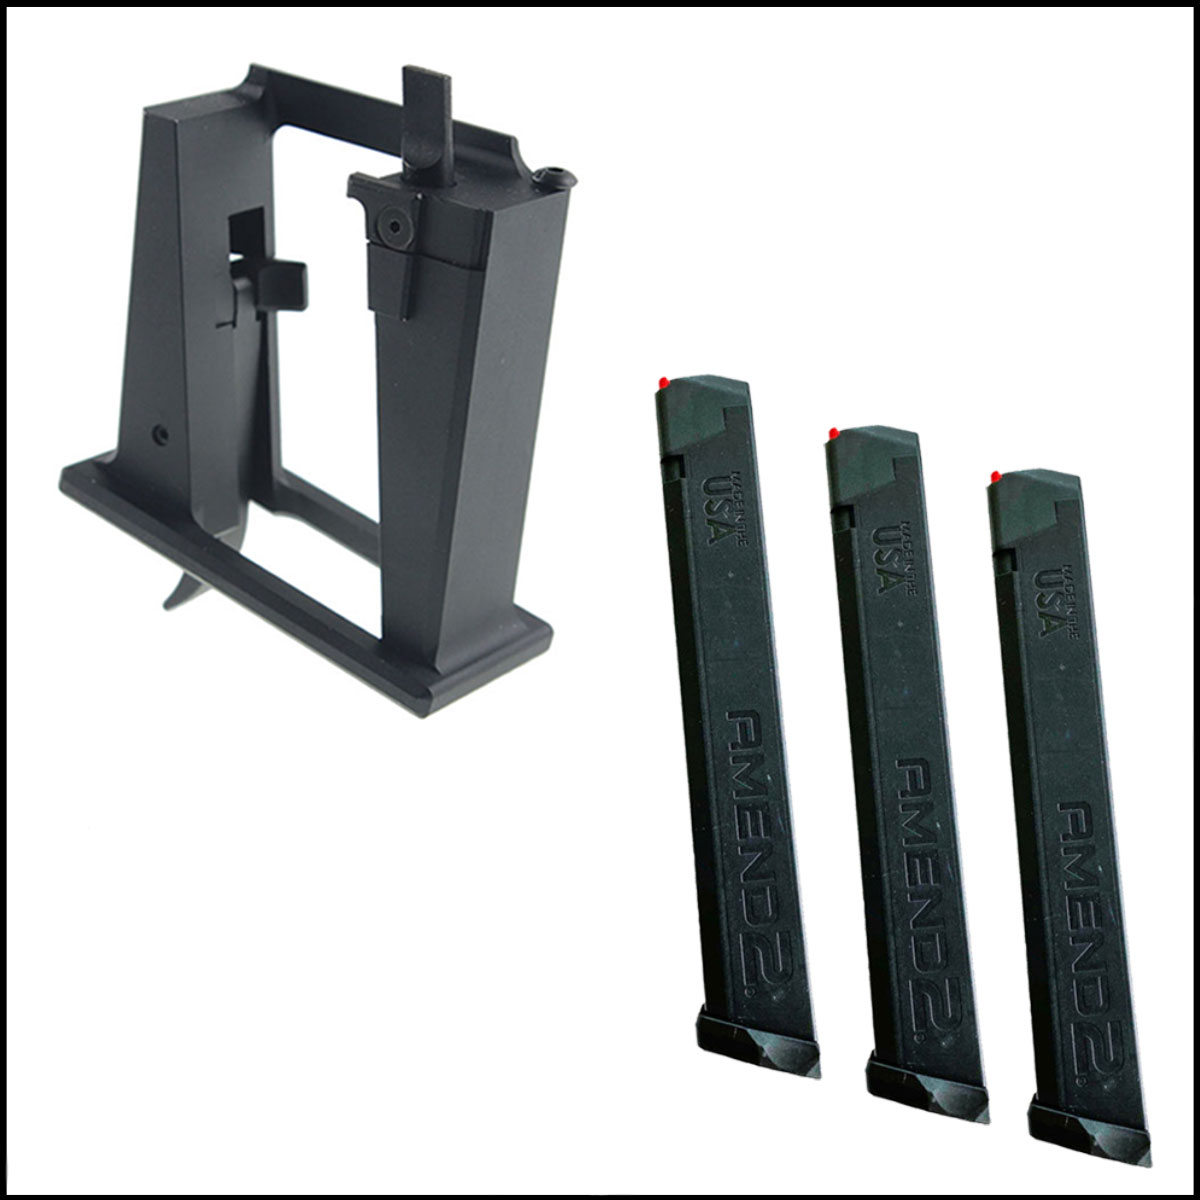 Conversion kit + Magazine combo: Sylvan Arms AR-15 9mm Magwell Adapter for Glock Magazines  + Amend2 A2-Stick 9mm 34-Round Black Magazine, G19 Compatible, 3-Pack